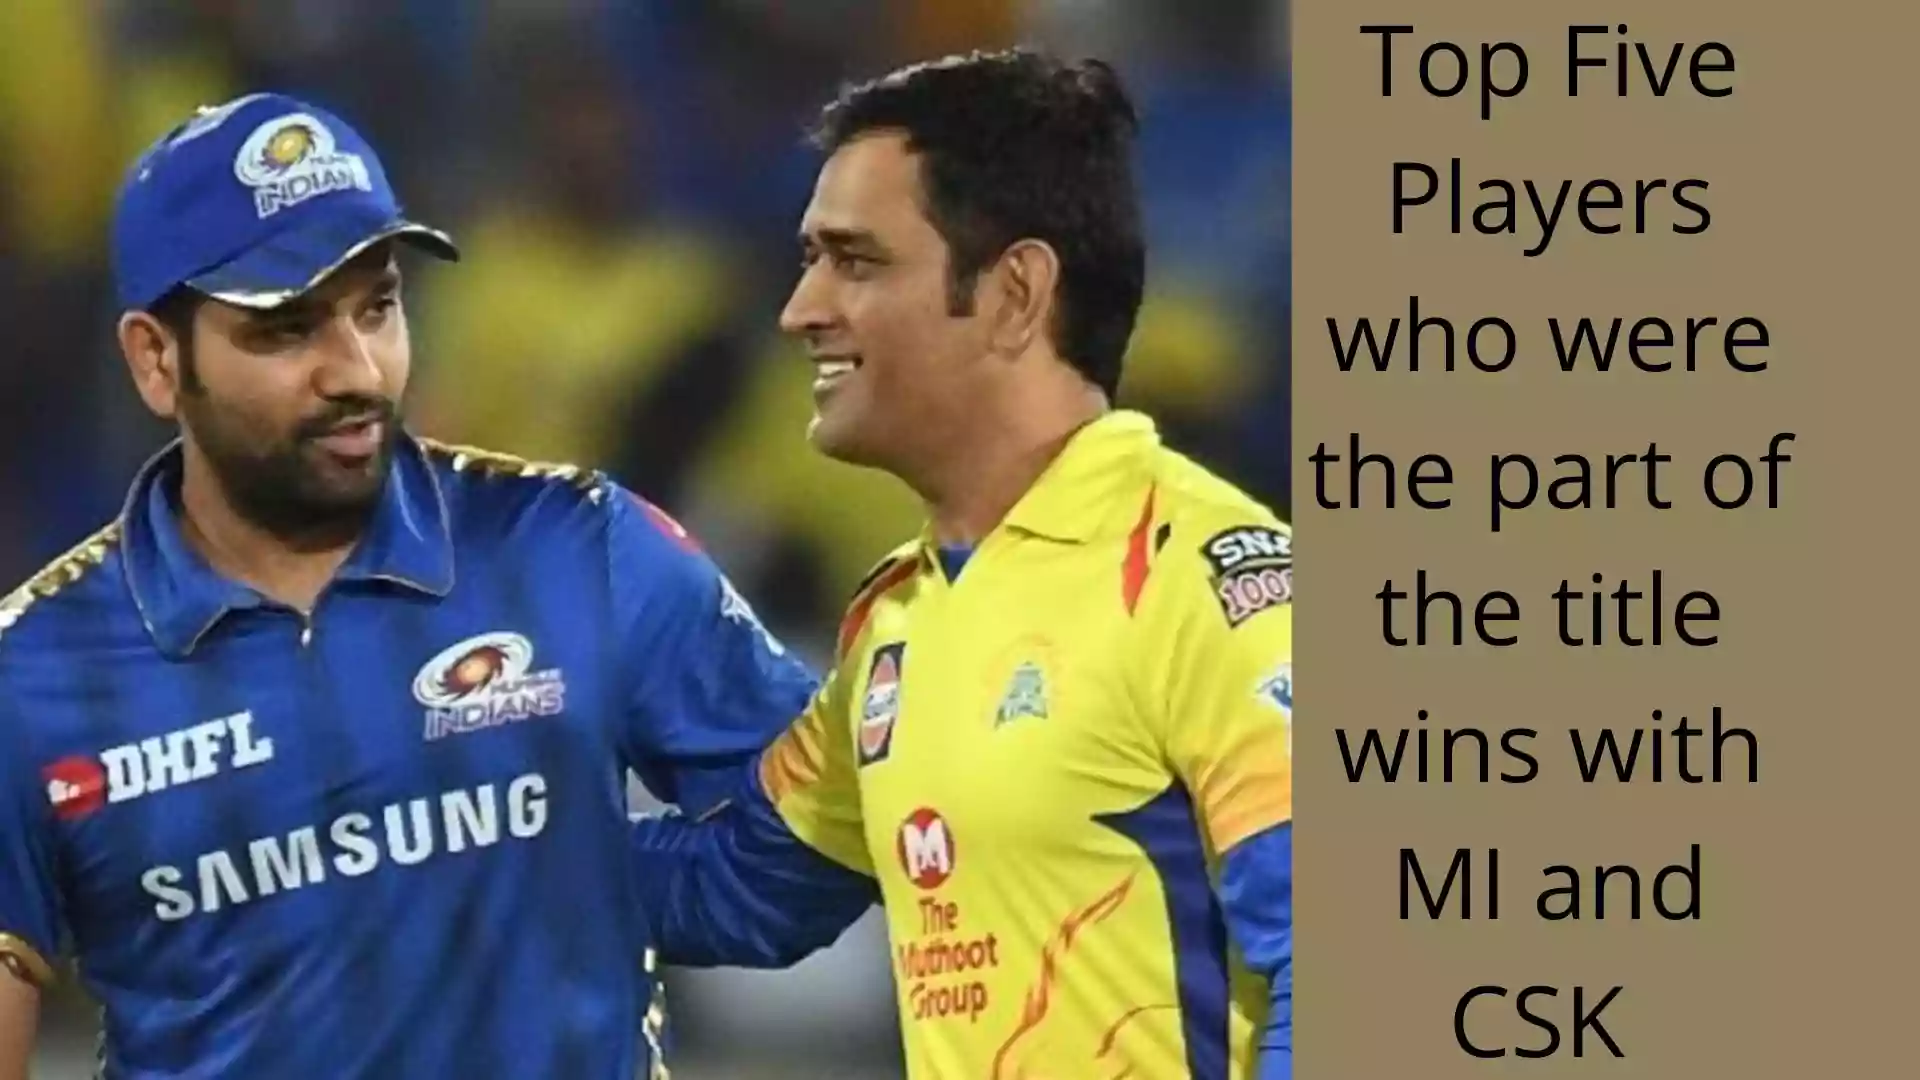 Top Five Players who were the part of the title wins with MI and CSK